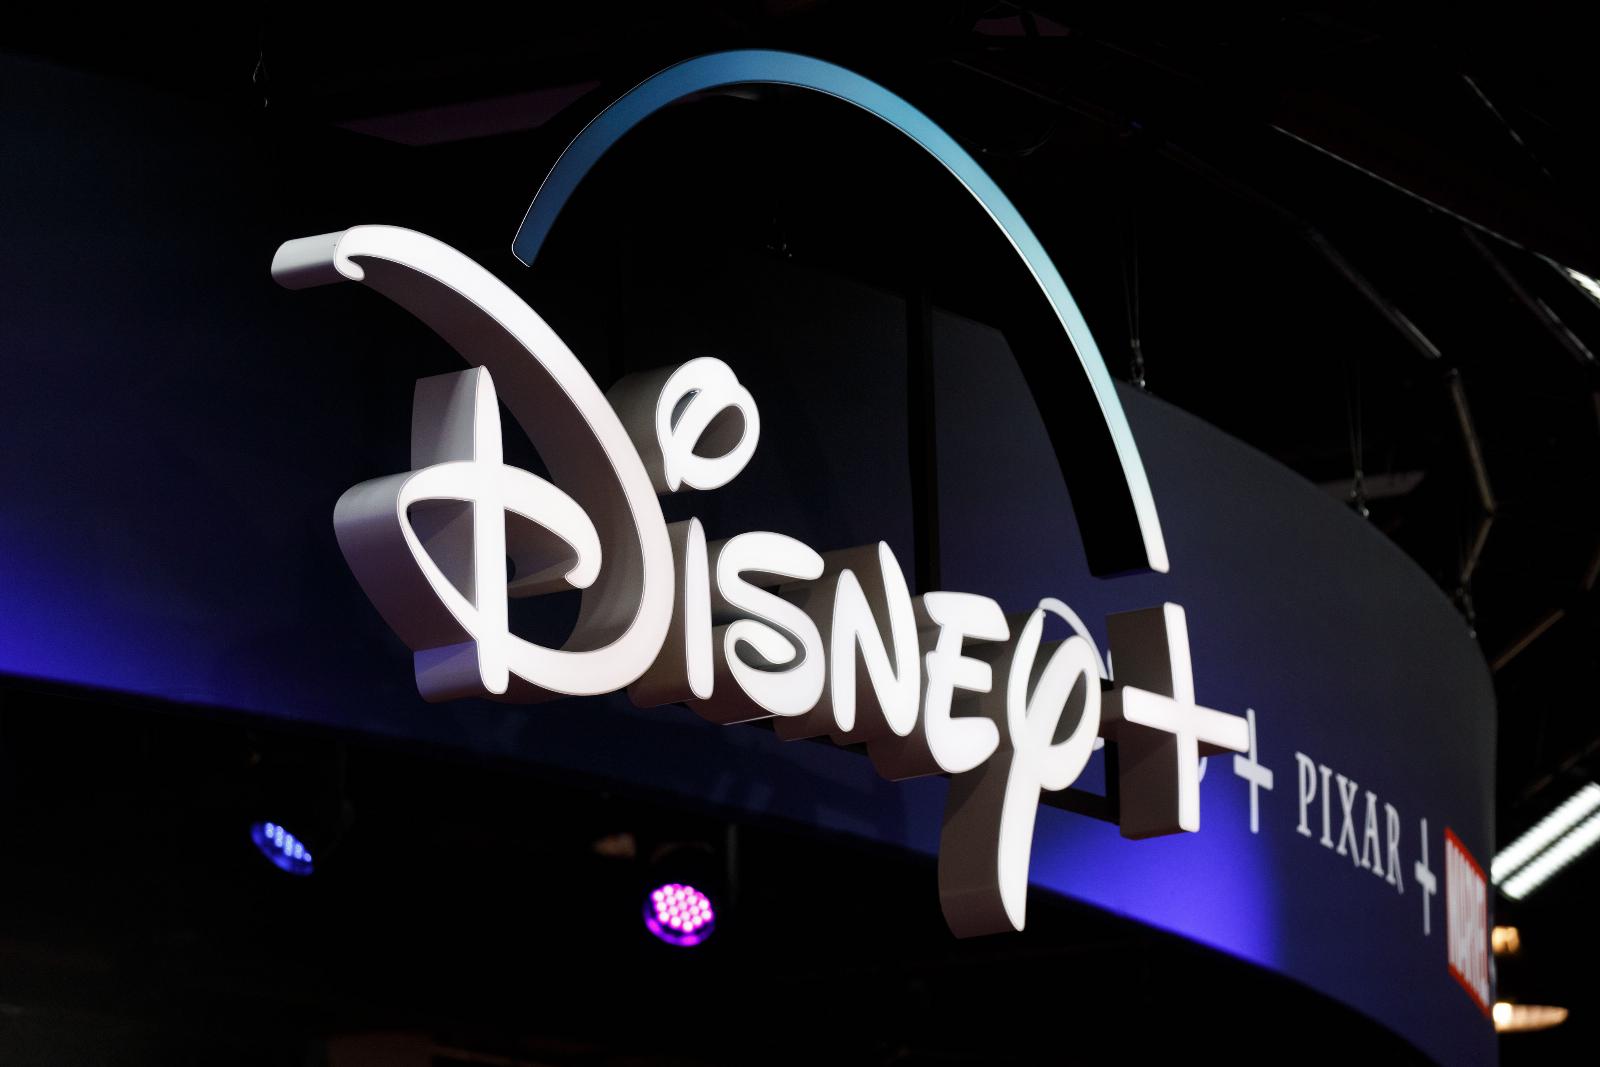 Disney+ loses subscribers for second quarter in a row, drops 4M subs